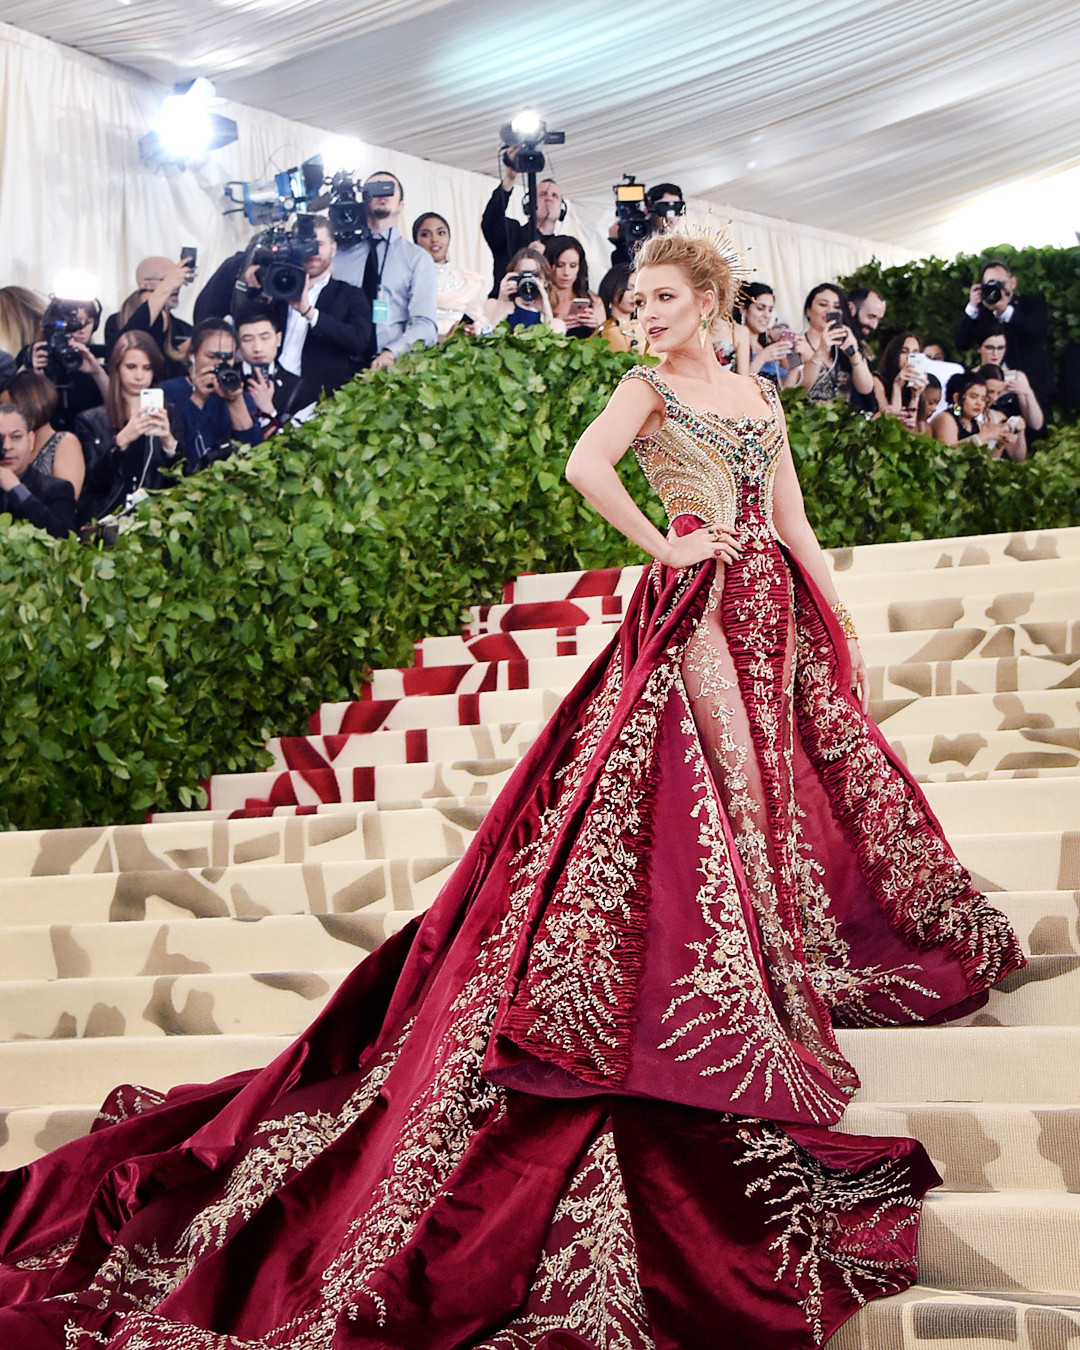 Met Gala Theme 2018: How Will Fashion And Religion Be Tackled